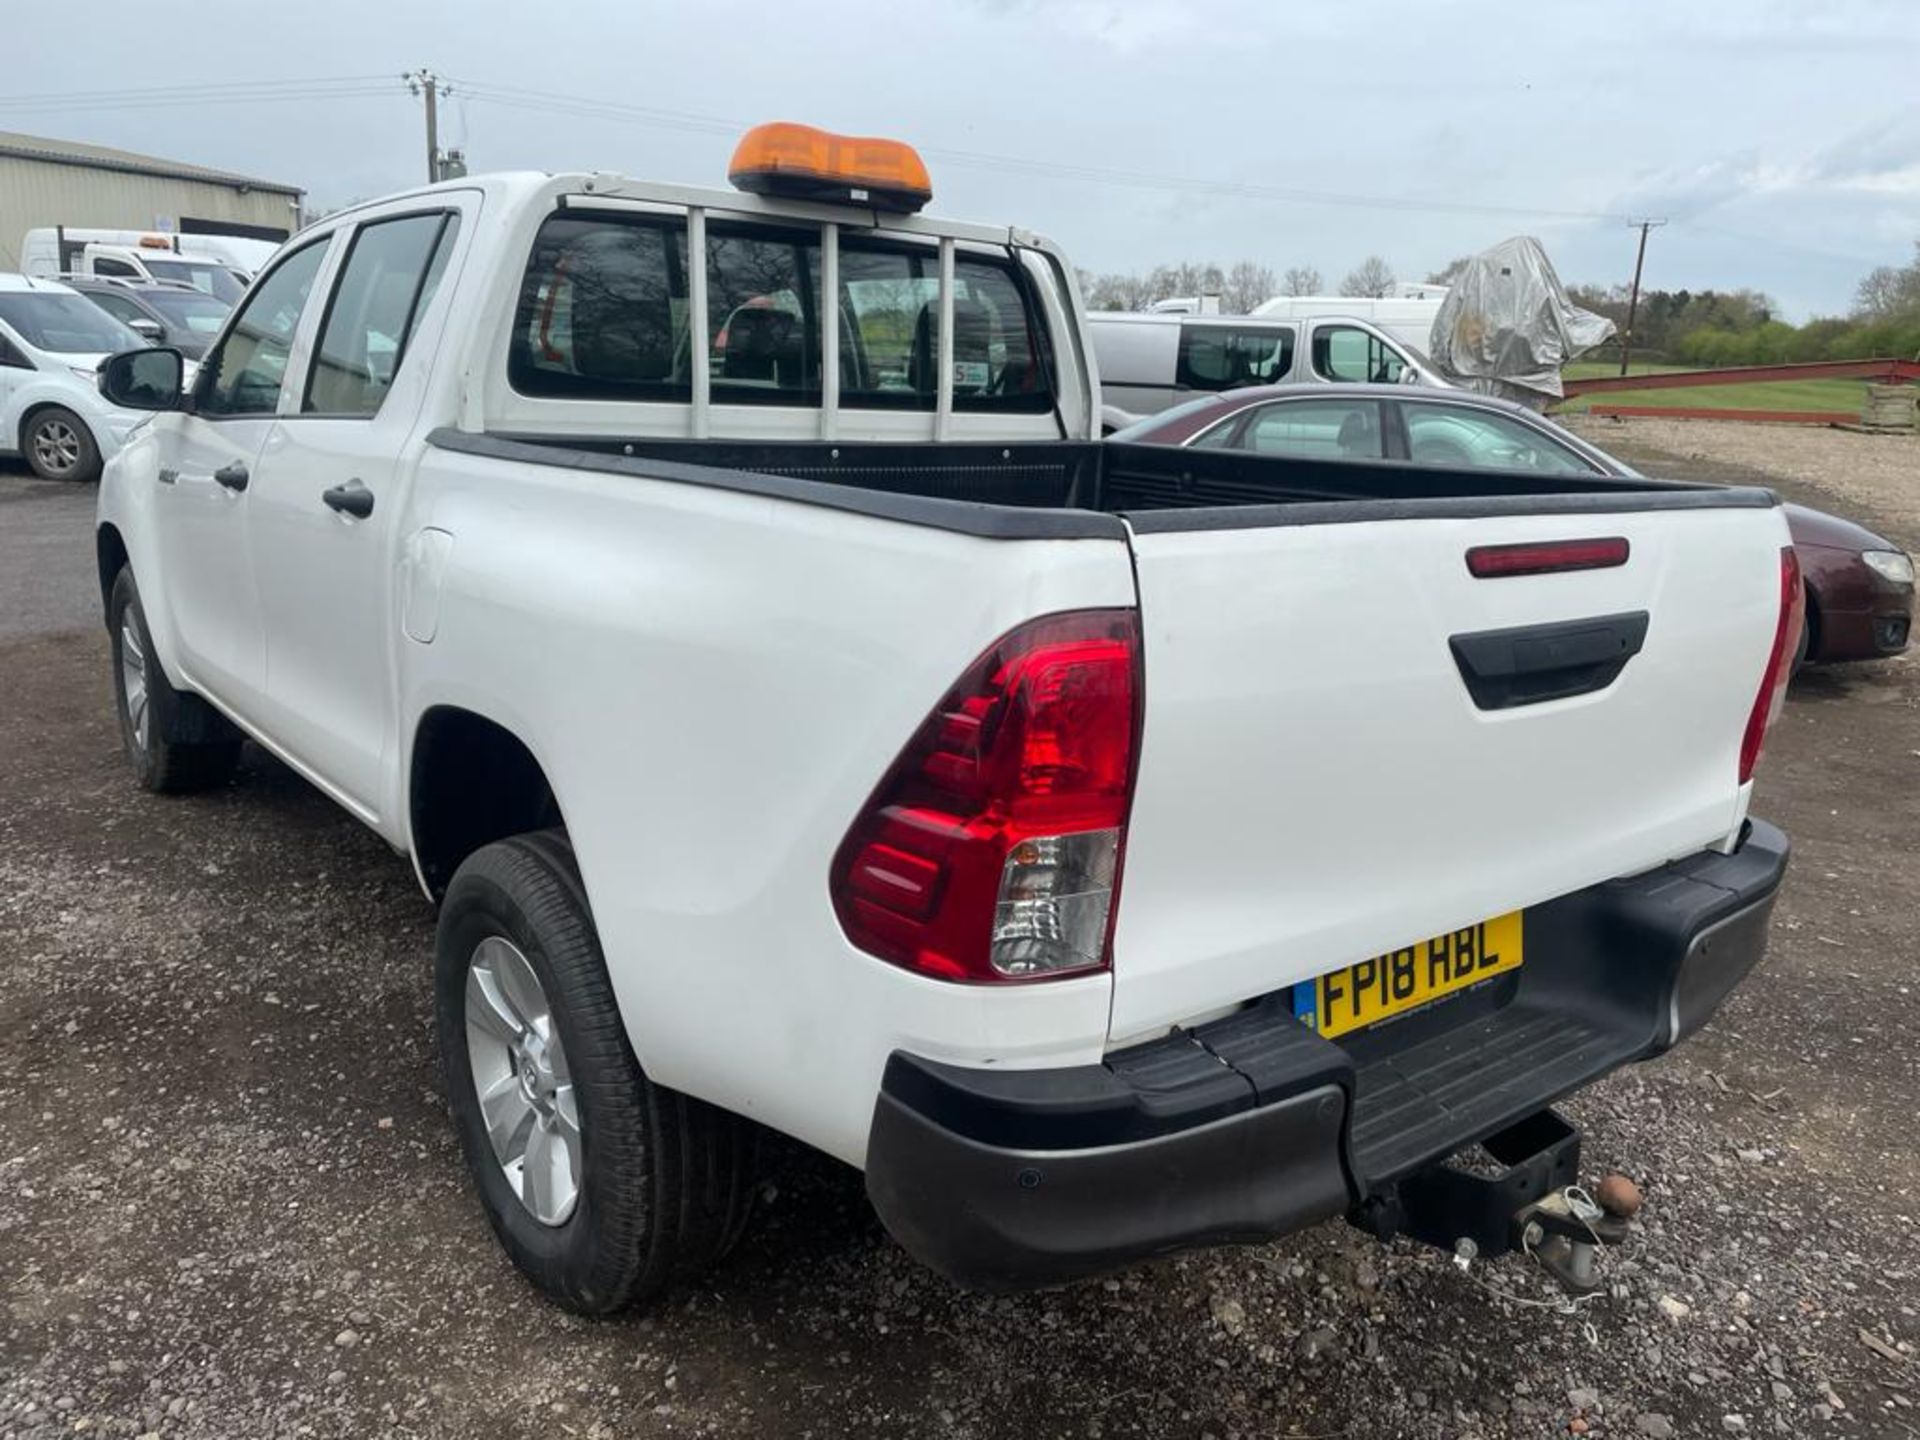 2018/18 REG TOYOTA HILUX ACTIVE D-4D 4WD DCB 2.4 DIESEL WHITE 4X4, SHOWING 1 FORMER KEEPER *PLUS VAT - Image 5 of 13